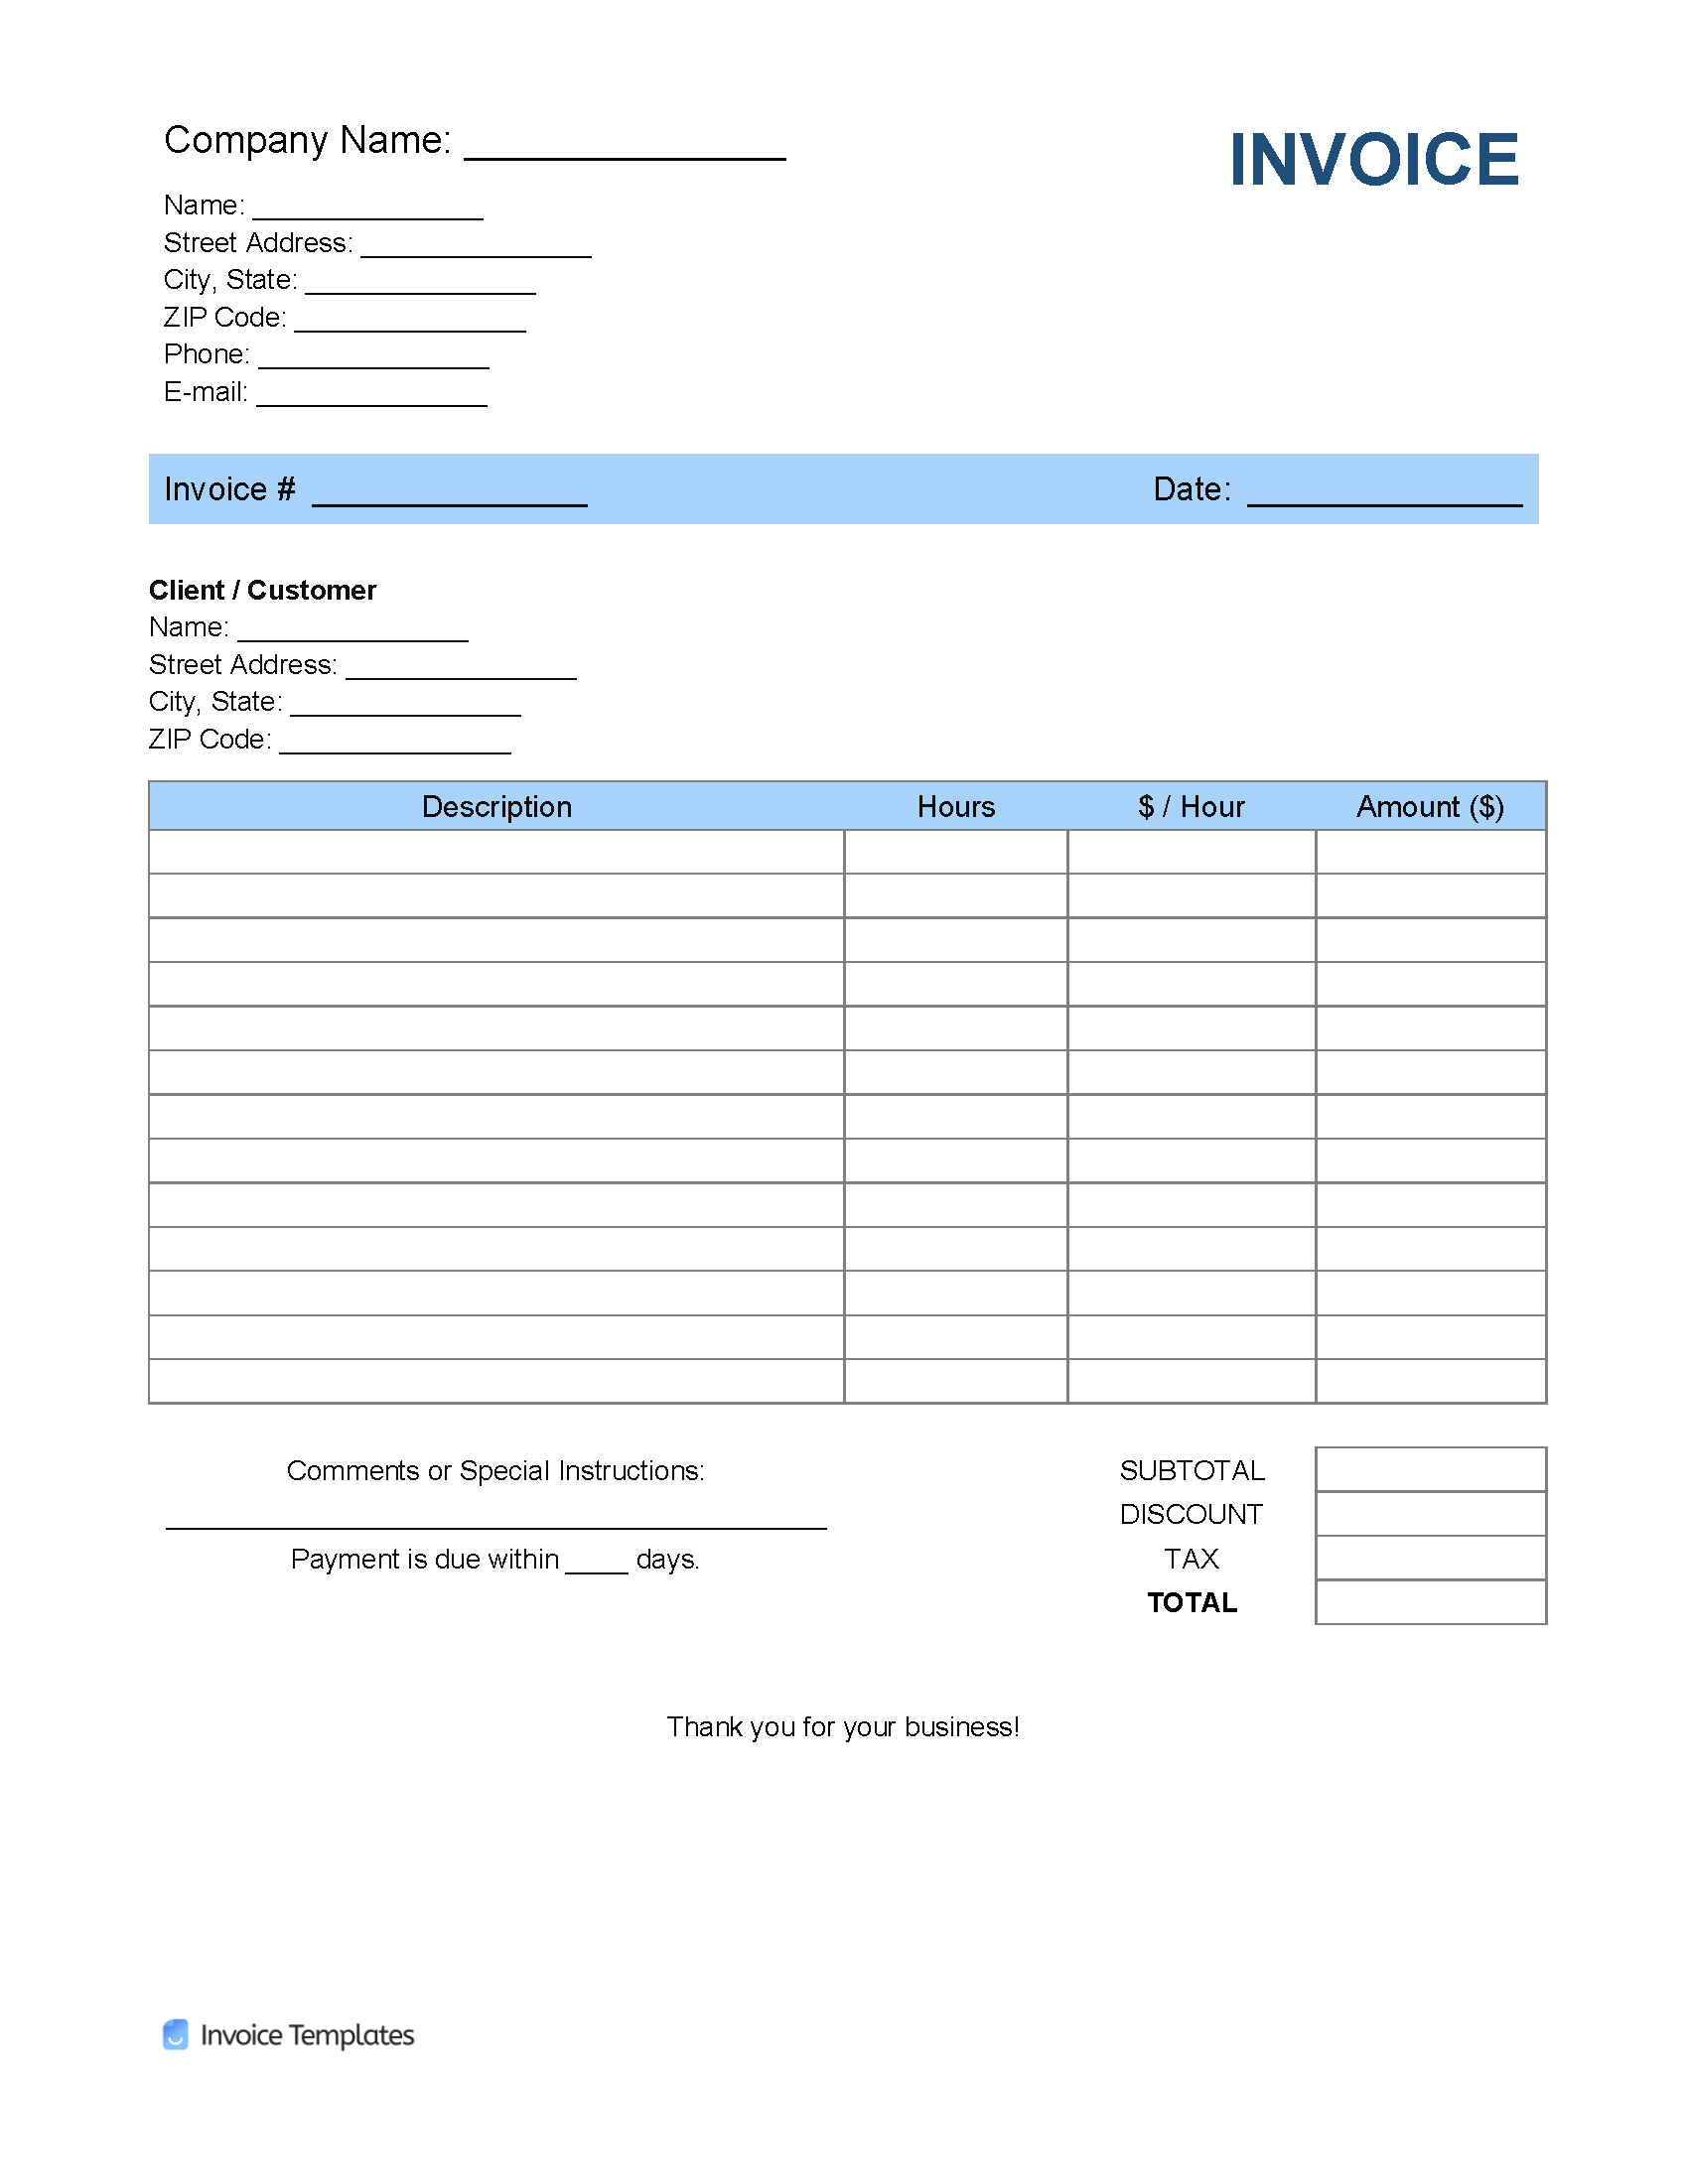 Statement Of Invoices Template Free from invoicetemplates.com